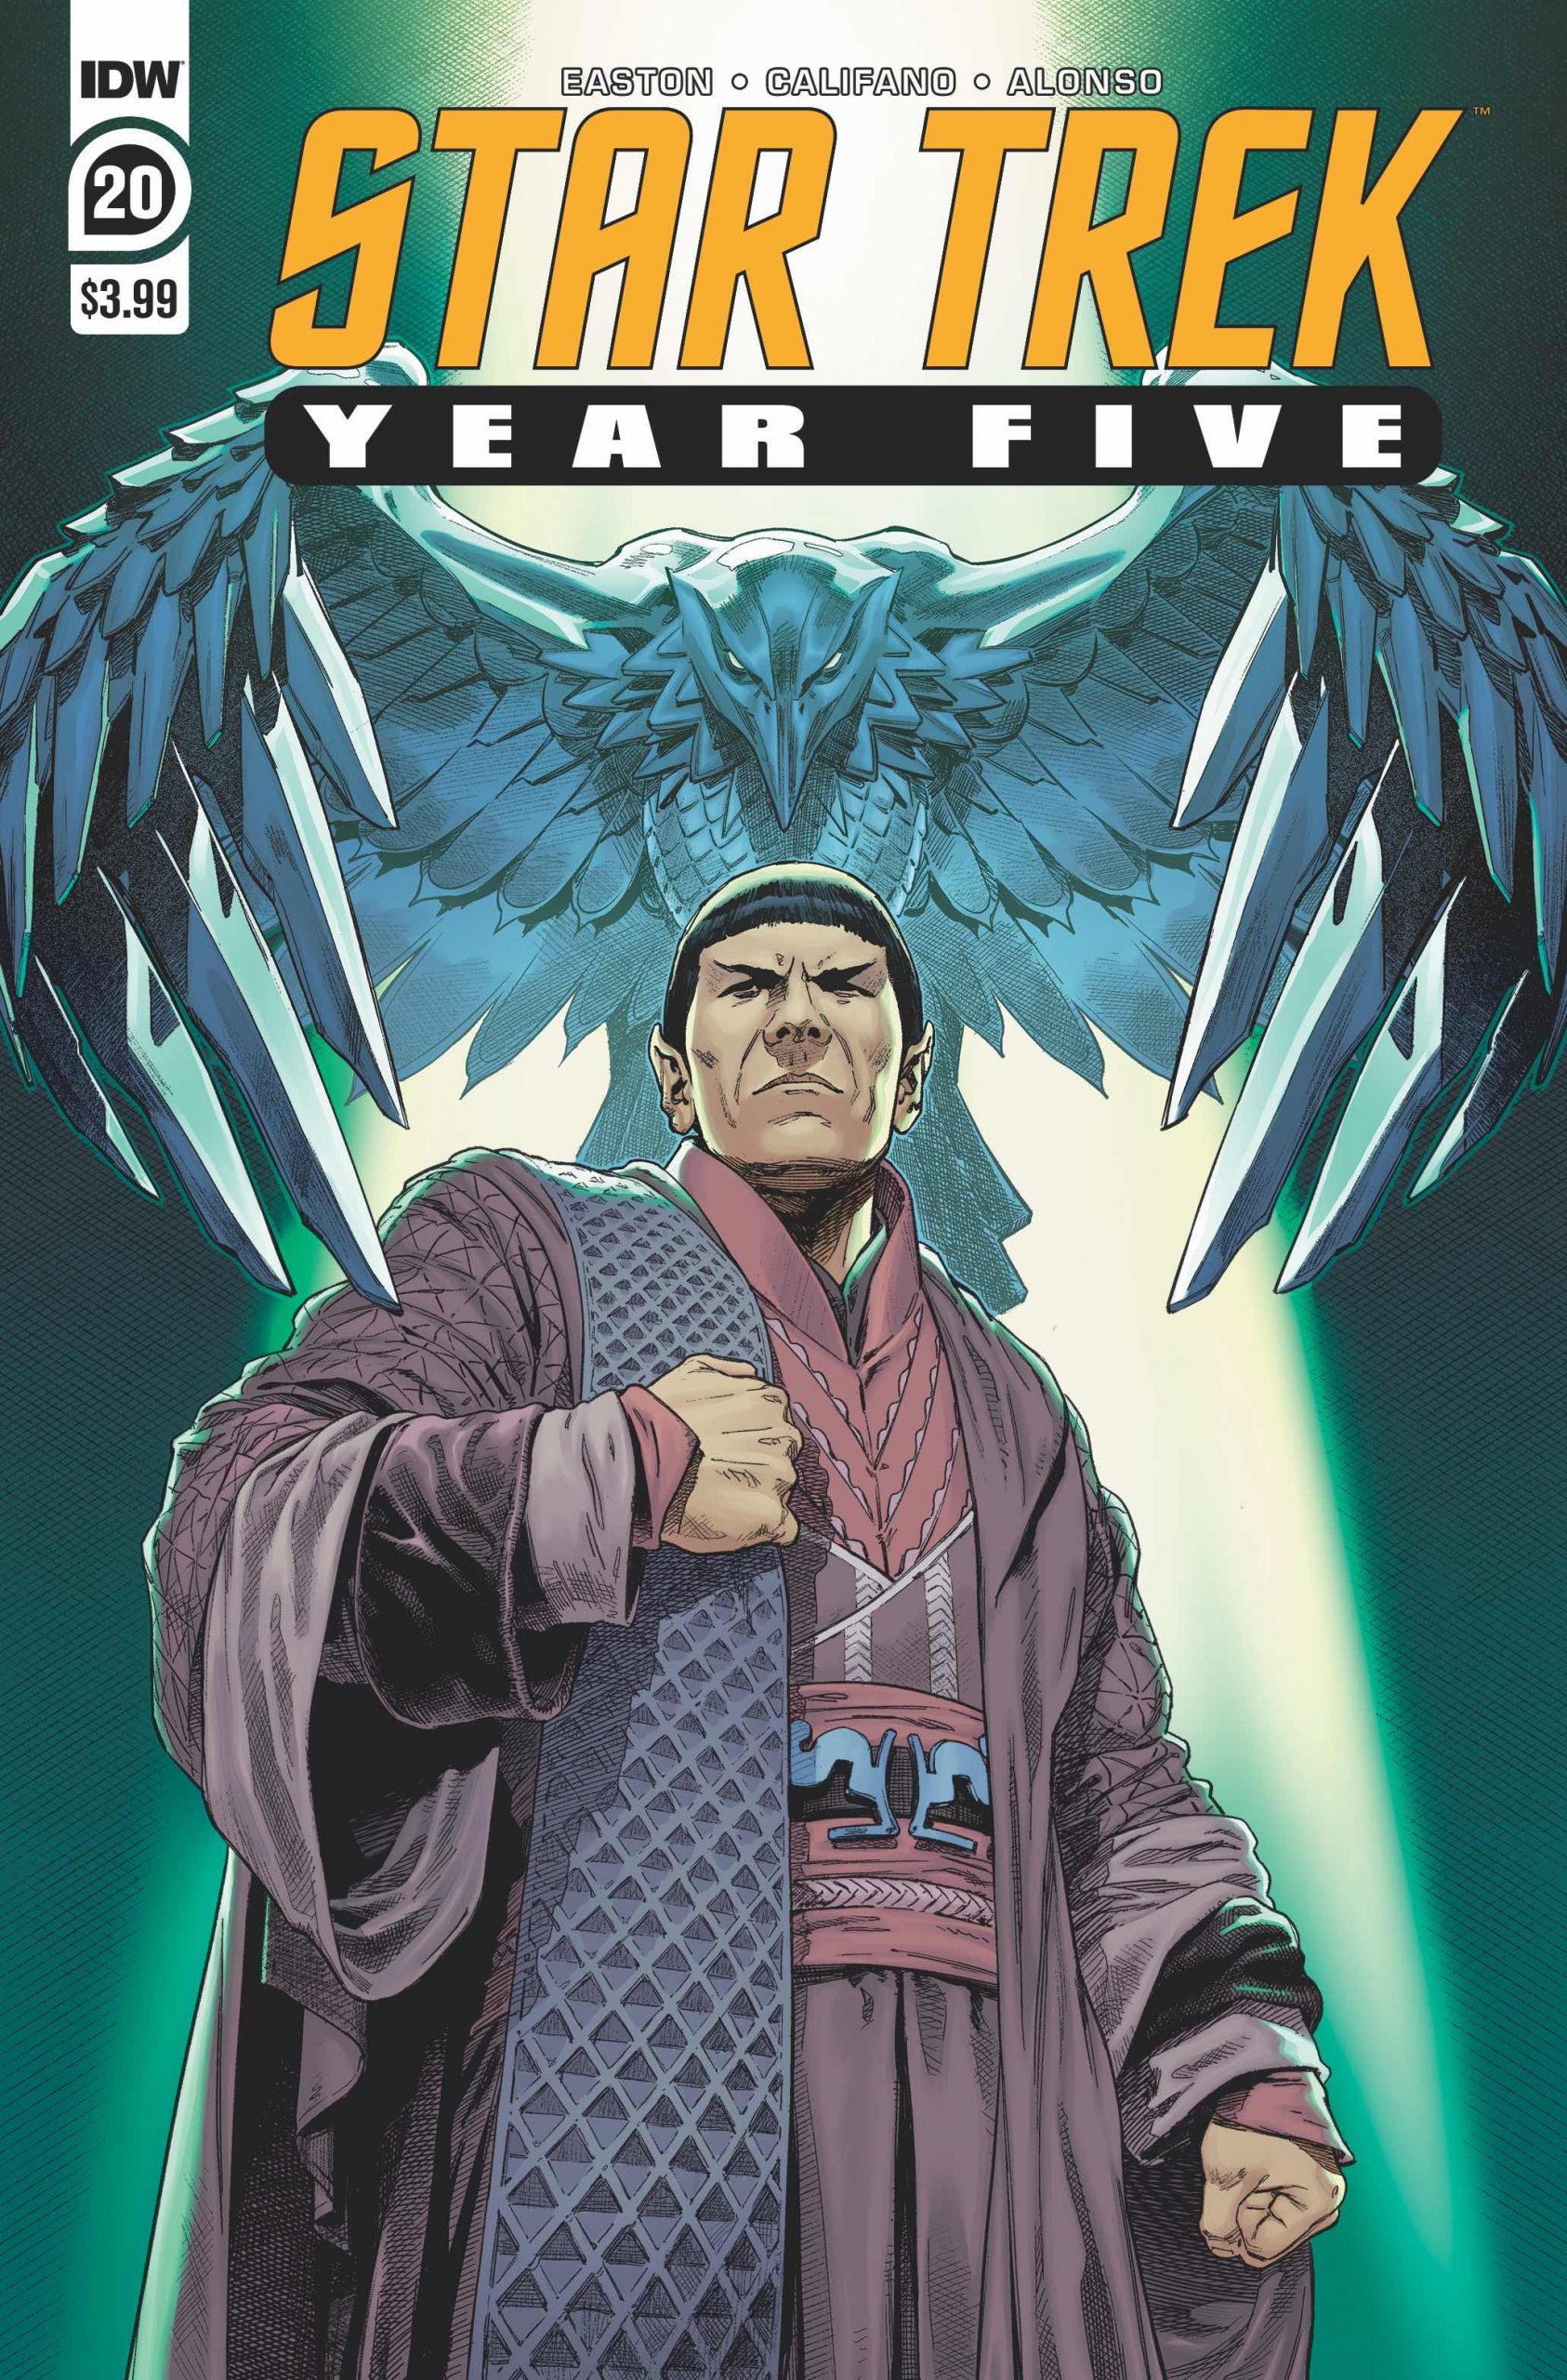 ST_YearFive20-cover-1